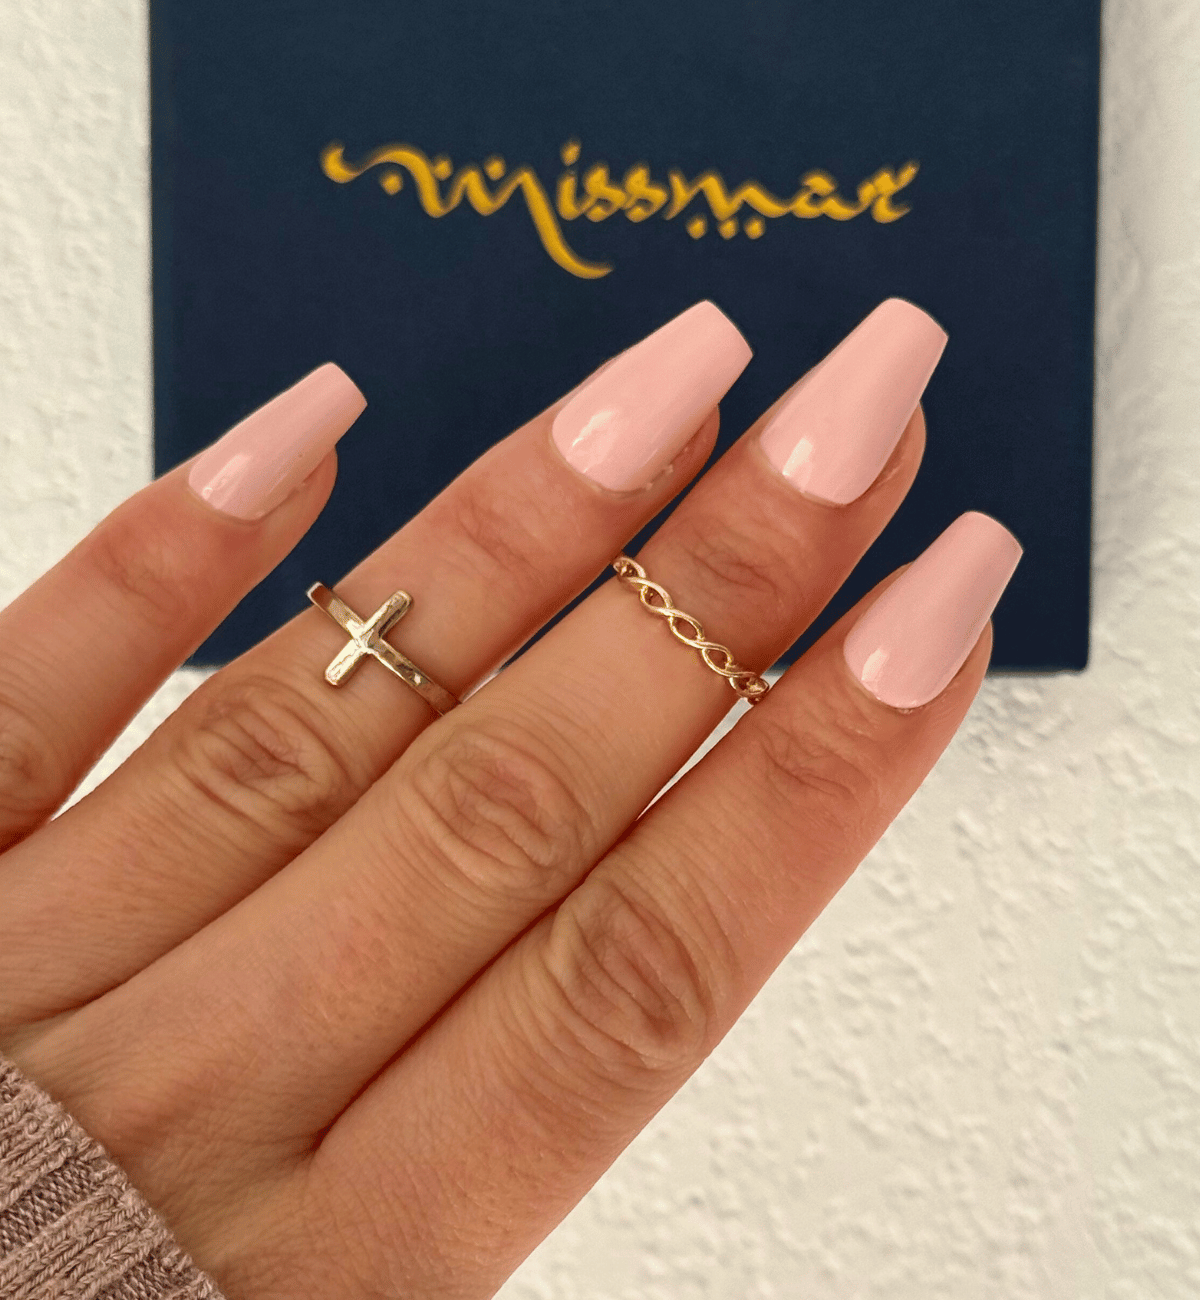 FAUX ONGLES NUDE ROSÉE COFFIN MEDIUM